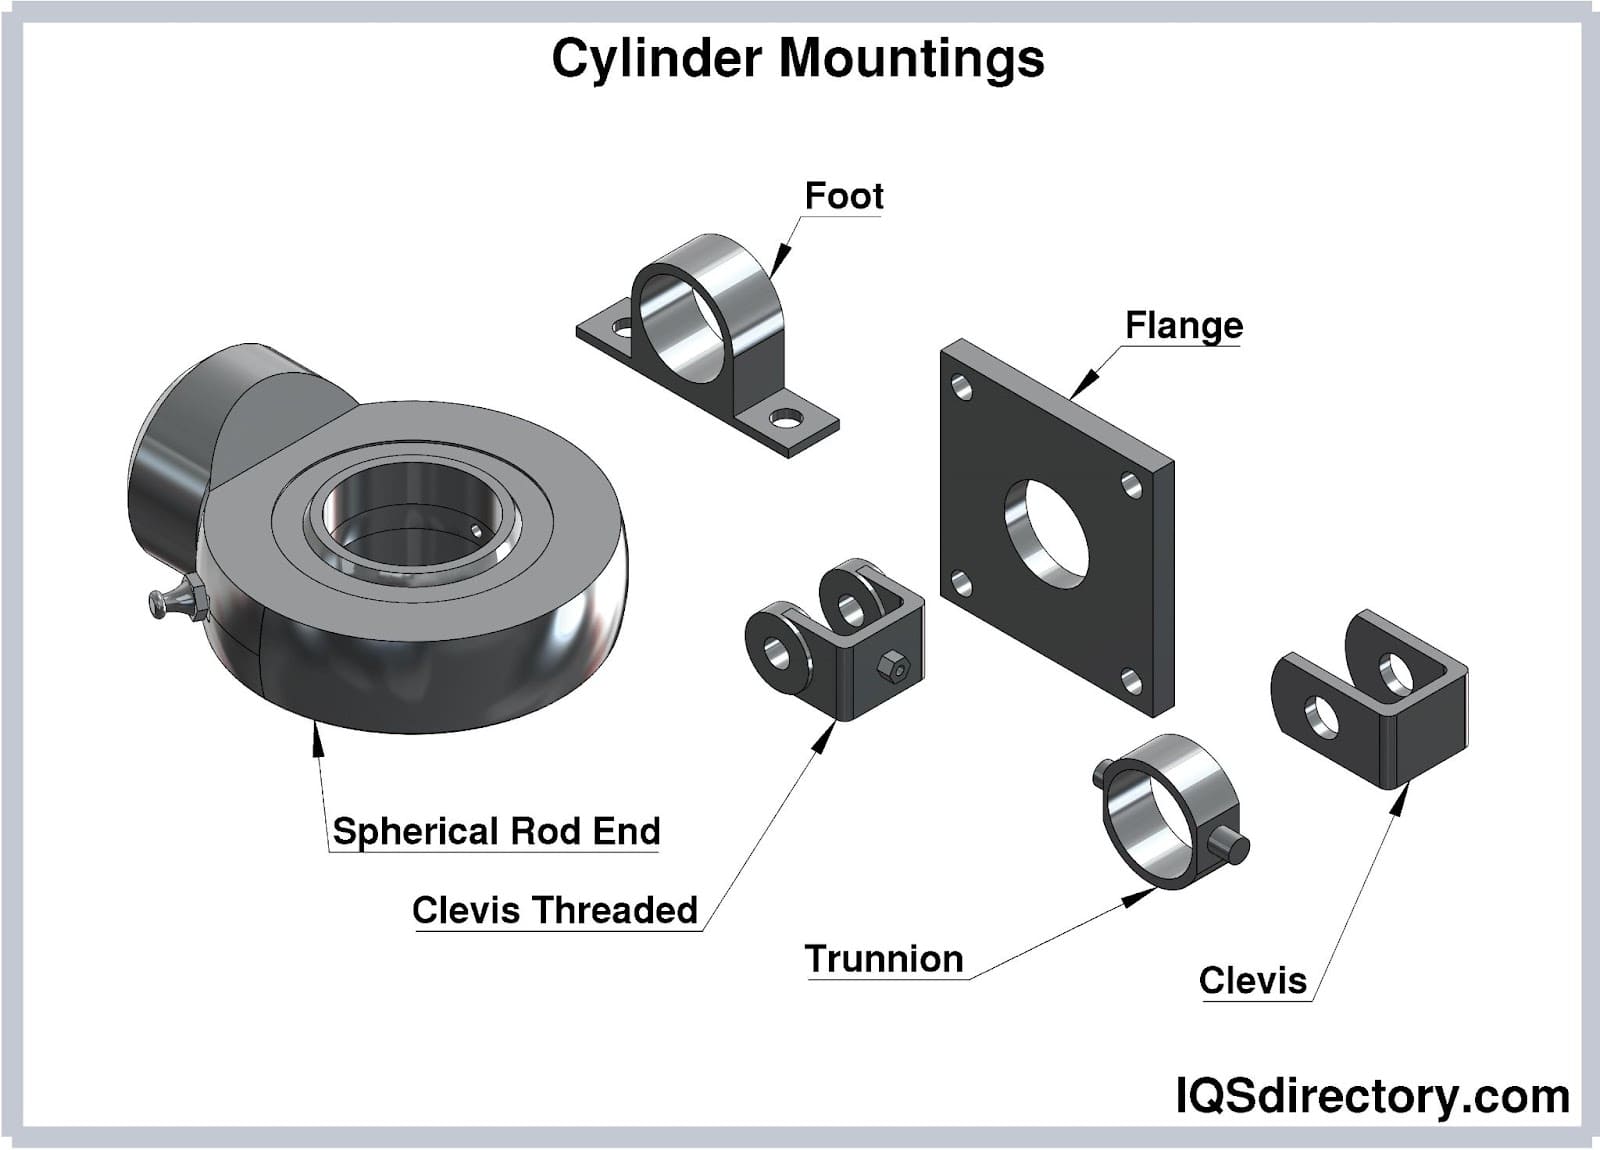 Cylinder Mountings